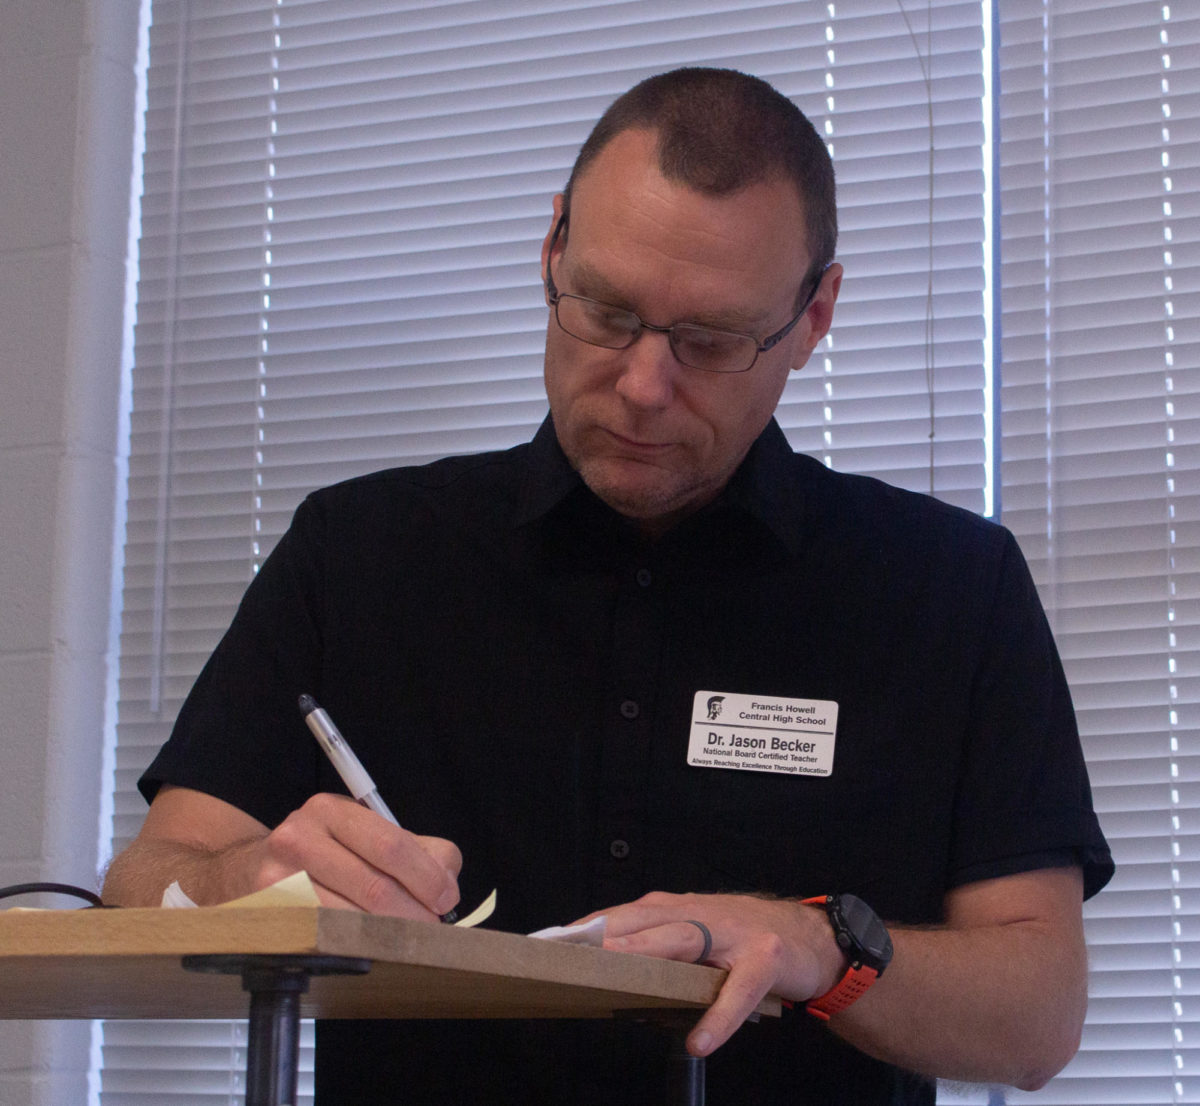 Dr. Becker grading student papers for a class assignment. He enjoys getting his work done at school in order to have more time in his after-school life to take time to relax. 